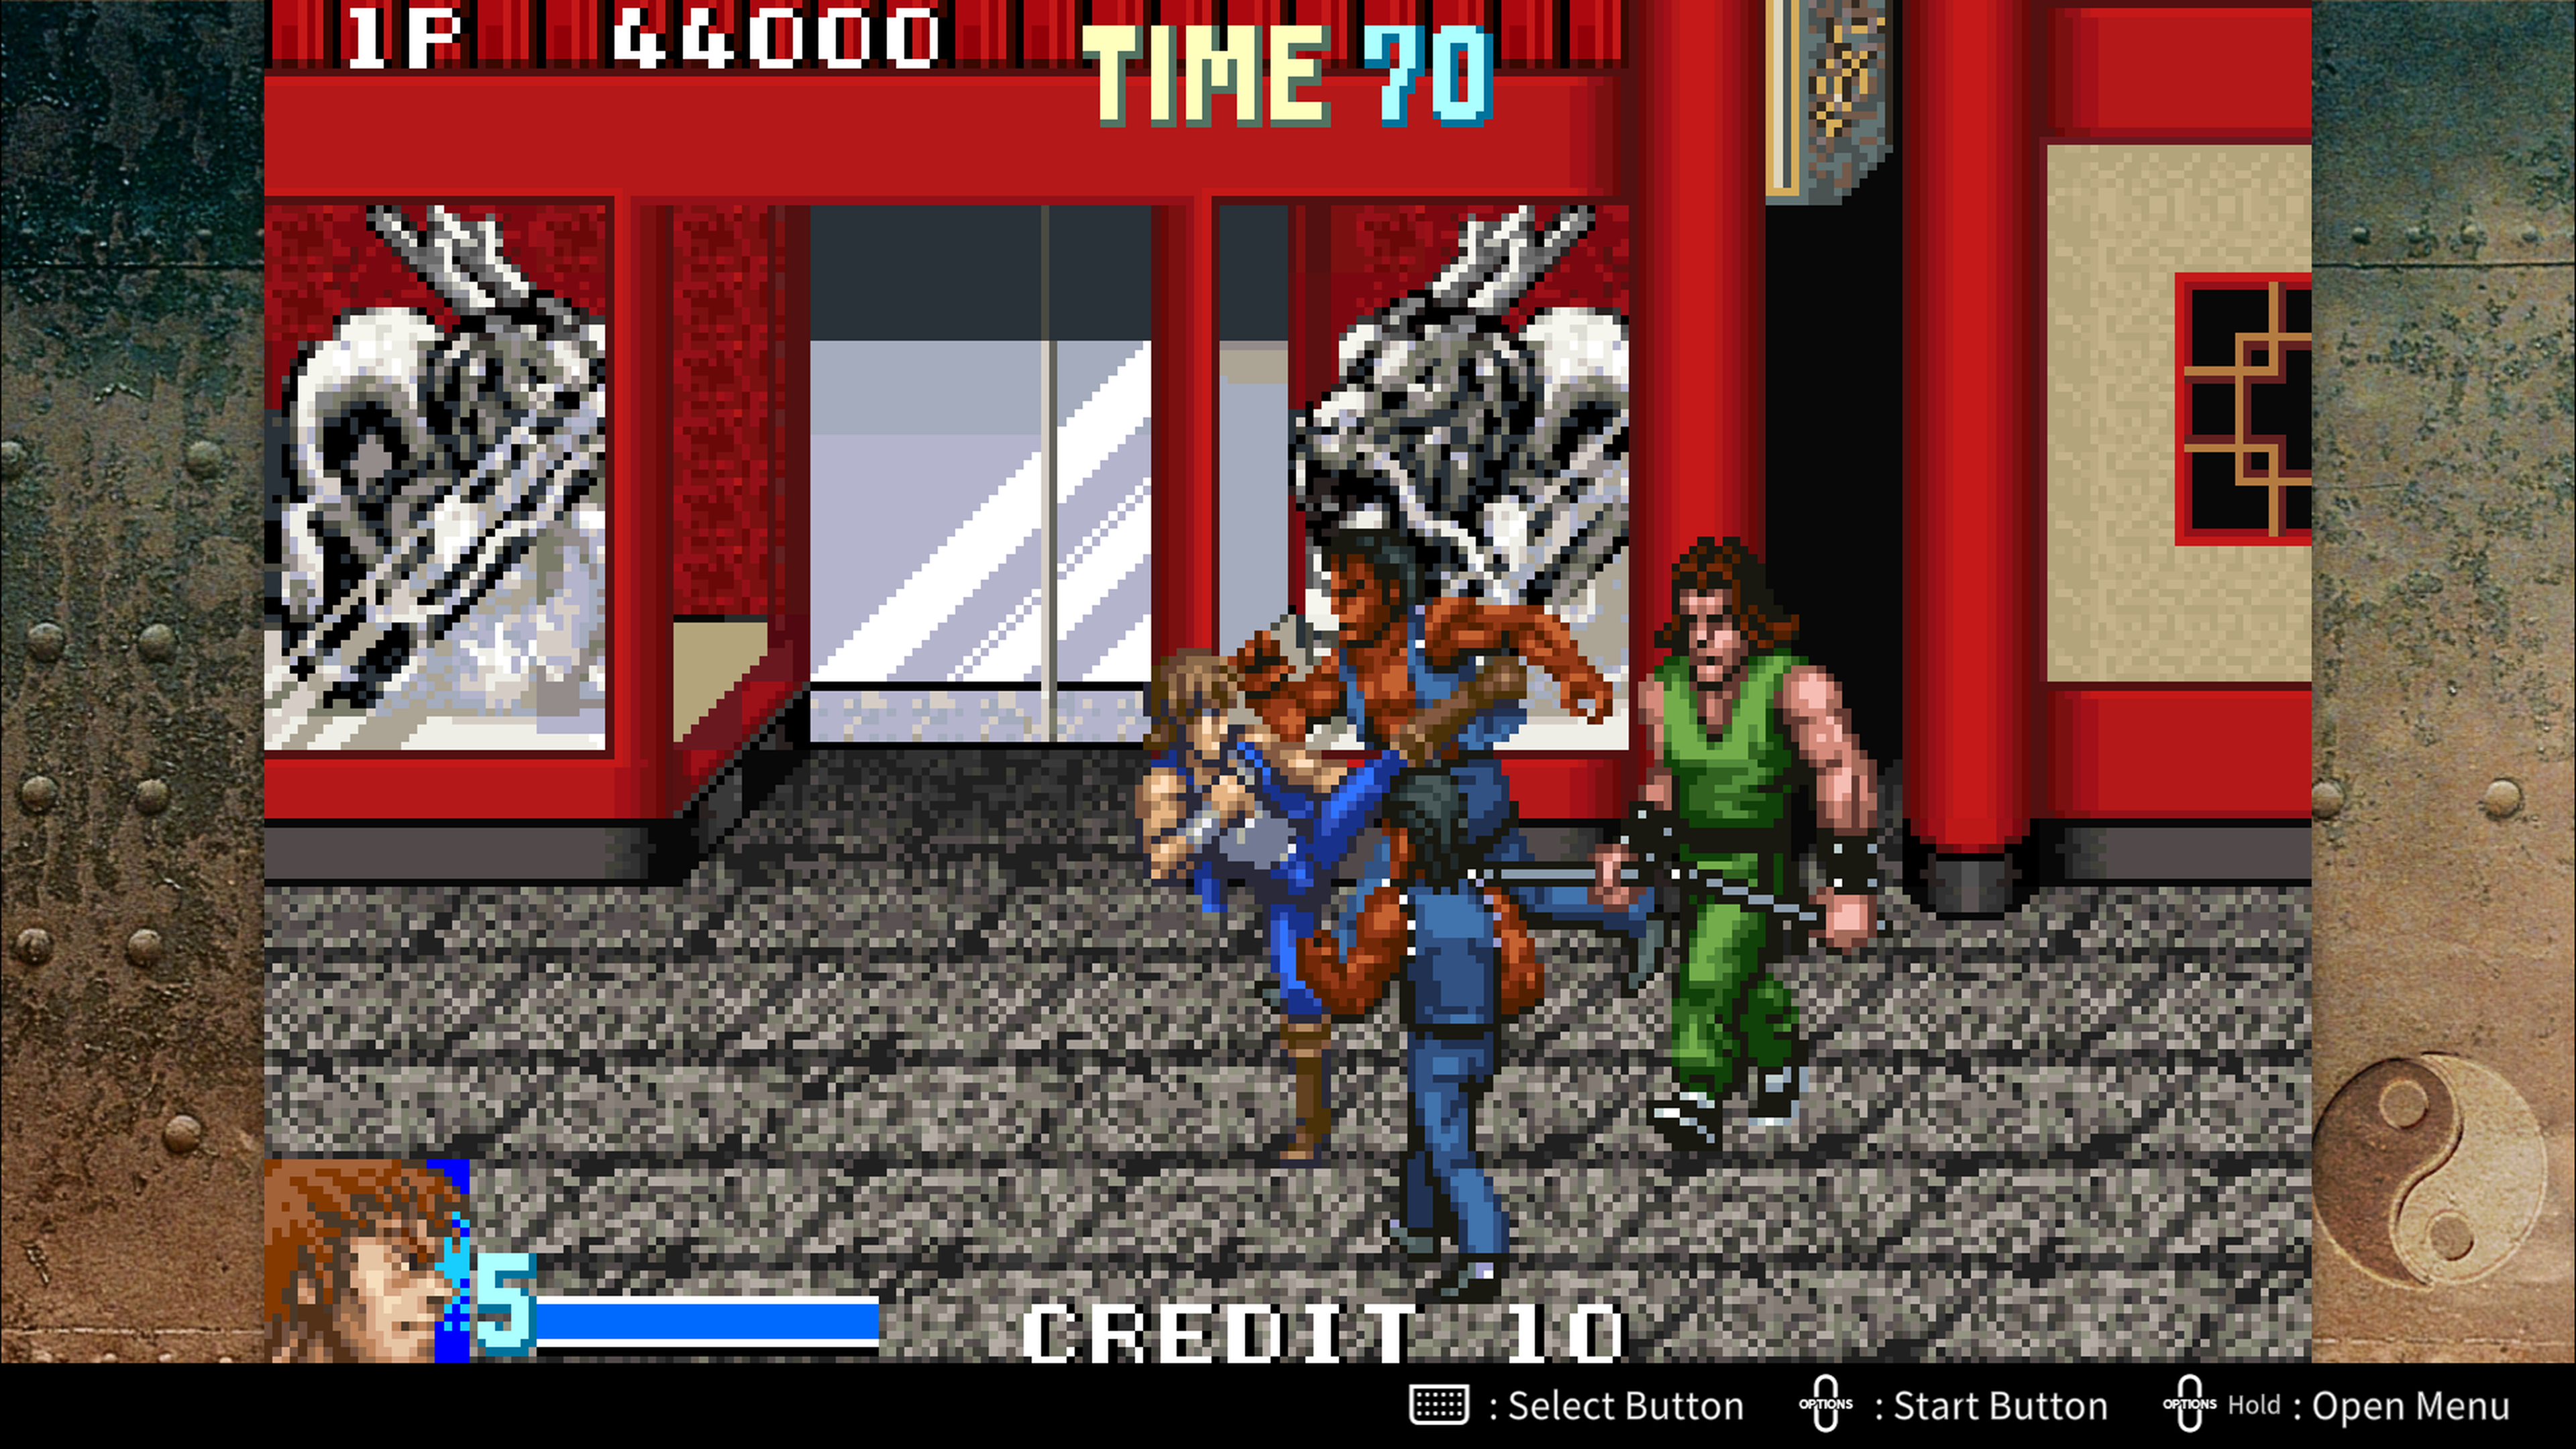 DOUBLE DRAGON ADVANCE AND SUPER DOUBLE DRAGON TO RELEASE ON MODERN CONSOLES  NOVEMBER 9, 2023